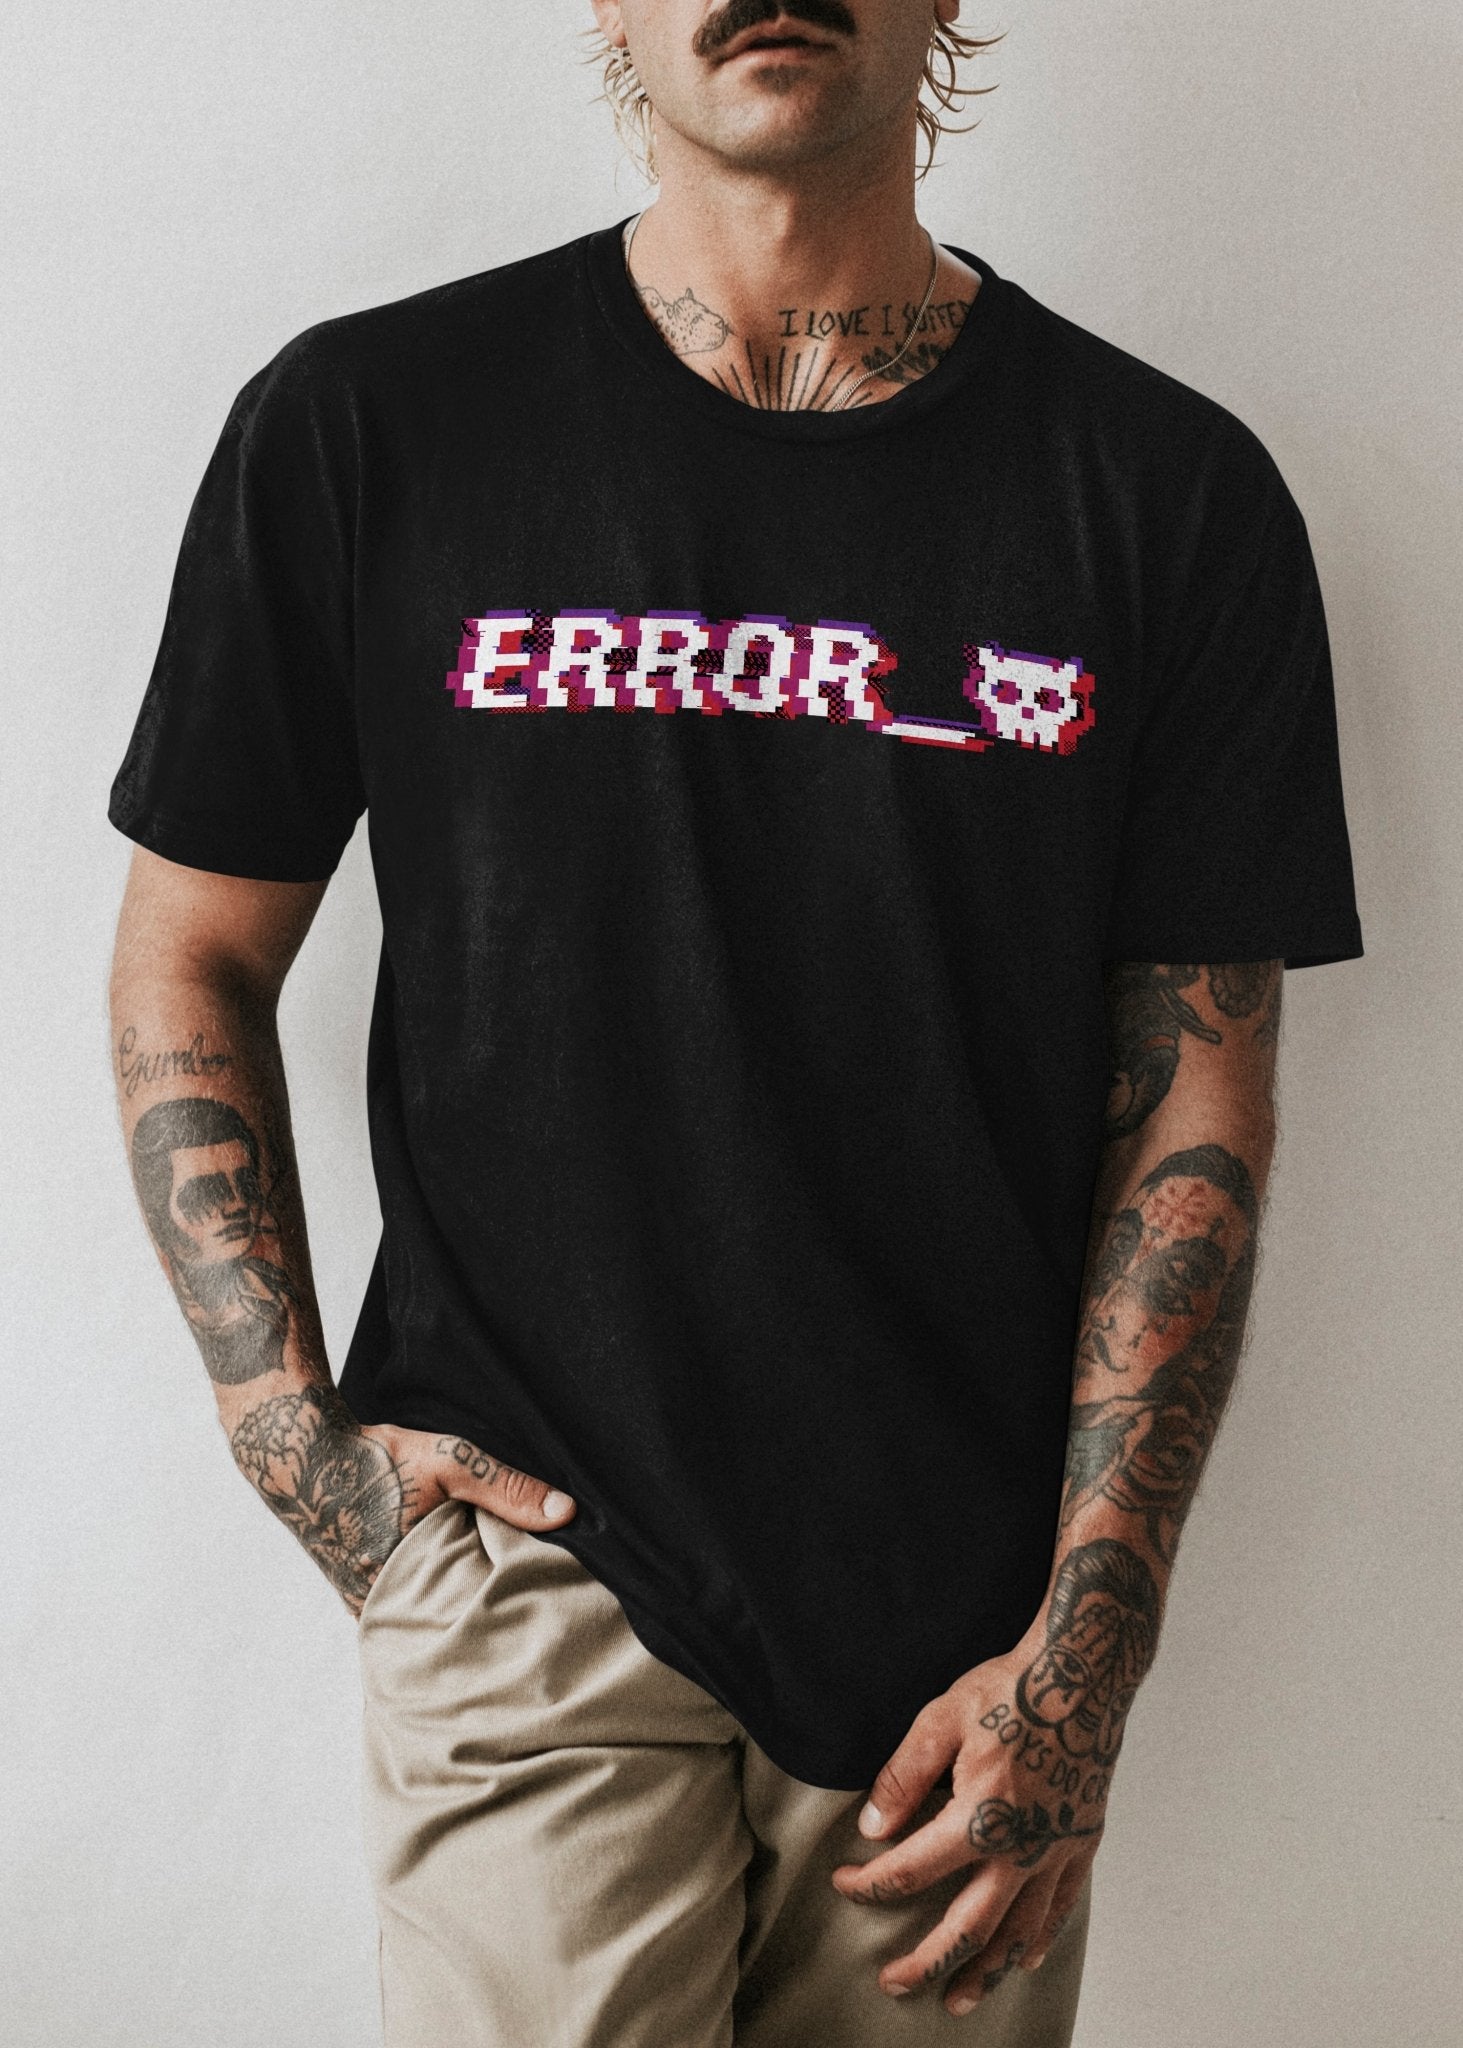 A tattooed man standing in a black alternative fashion shirt with a red and purple image of the word error along with a white pixelated devil skull next to it.